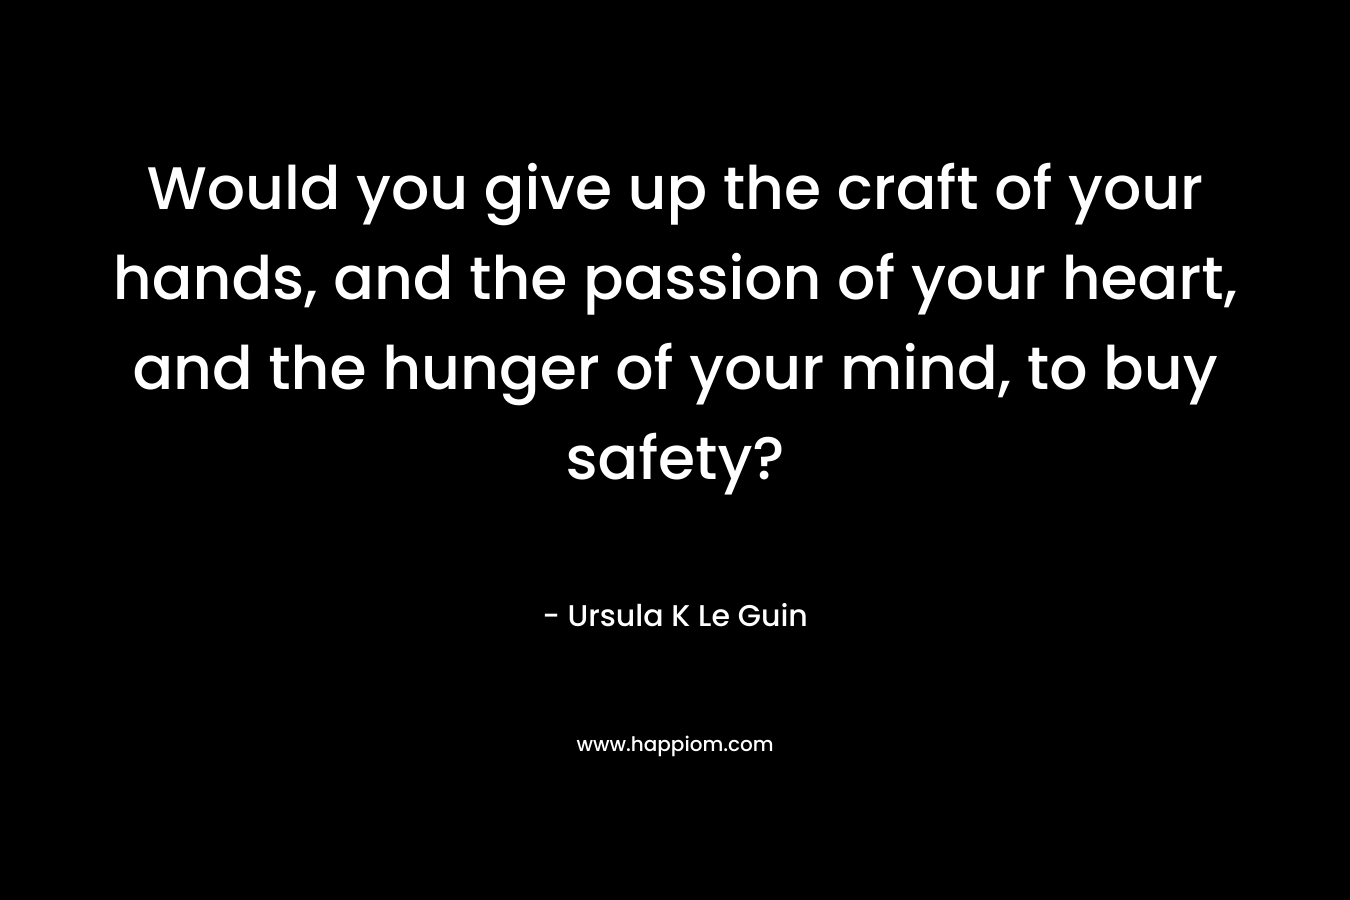 Would you give up the craft of your hands, and the passion of your heart, and the hunger of your mind, to buy safety?